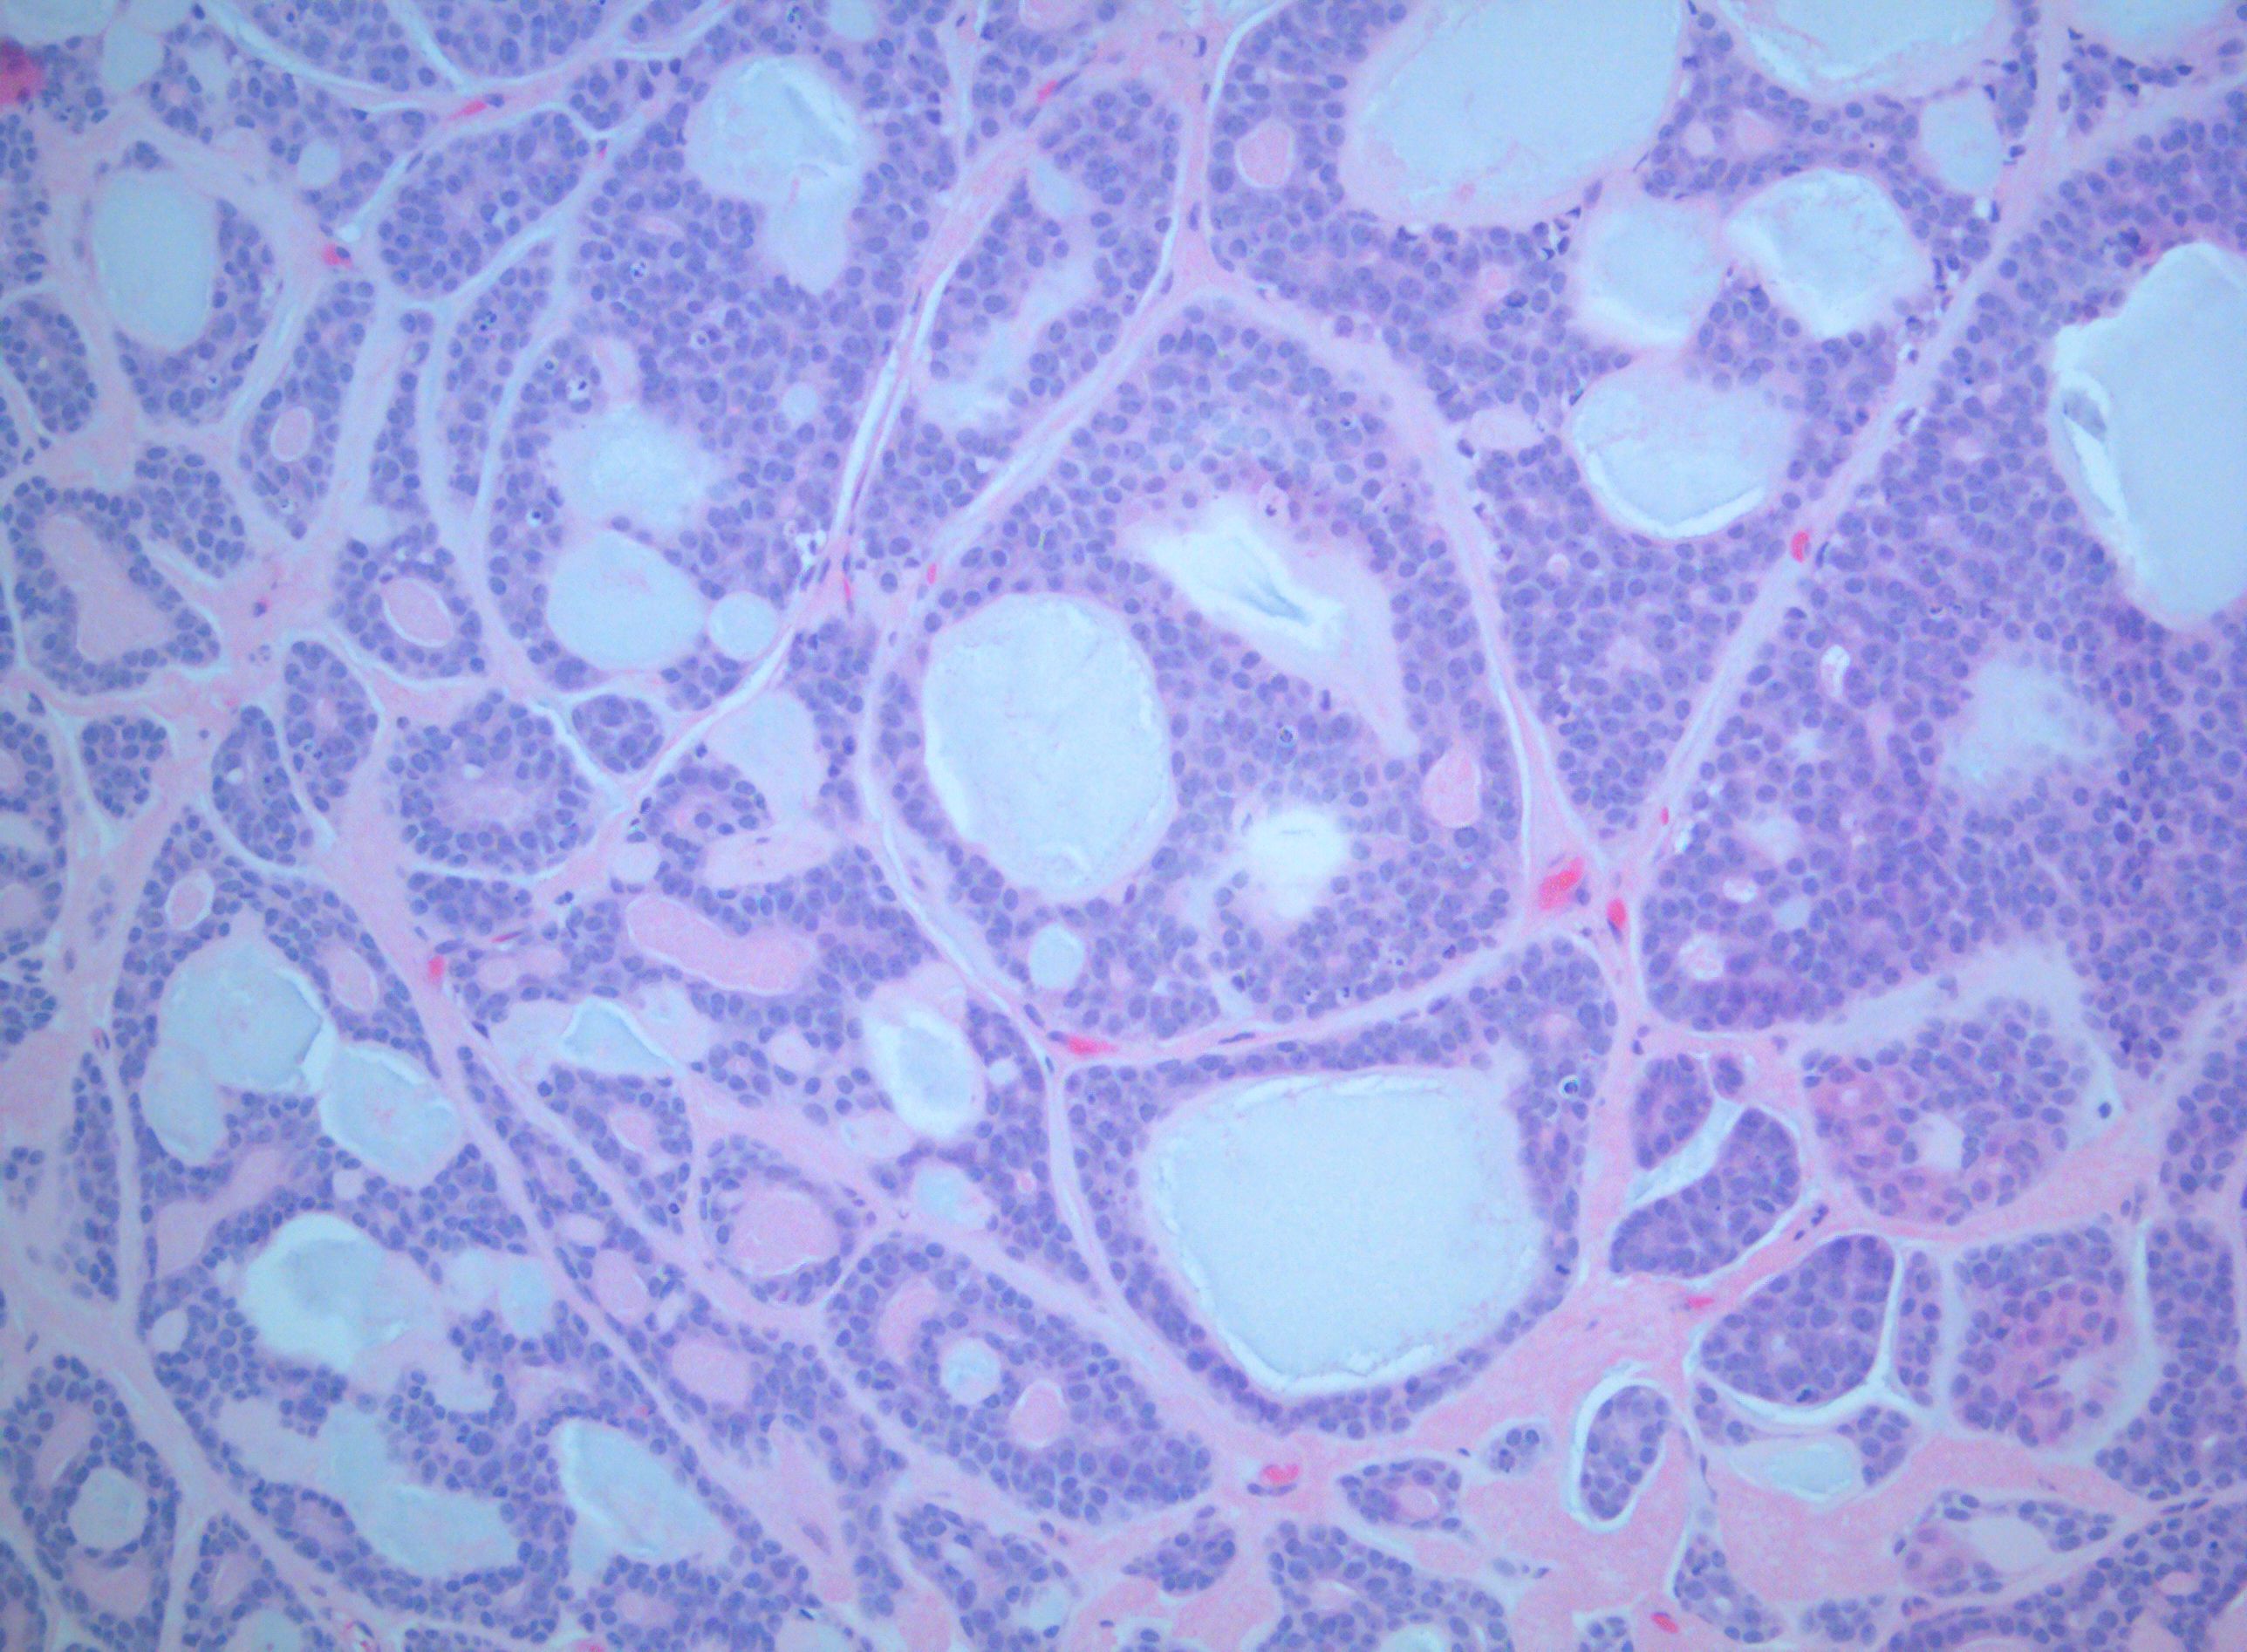 Acinic Cell Carcinoma (ACC) of the Palate